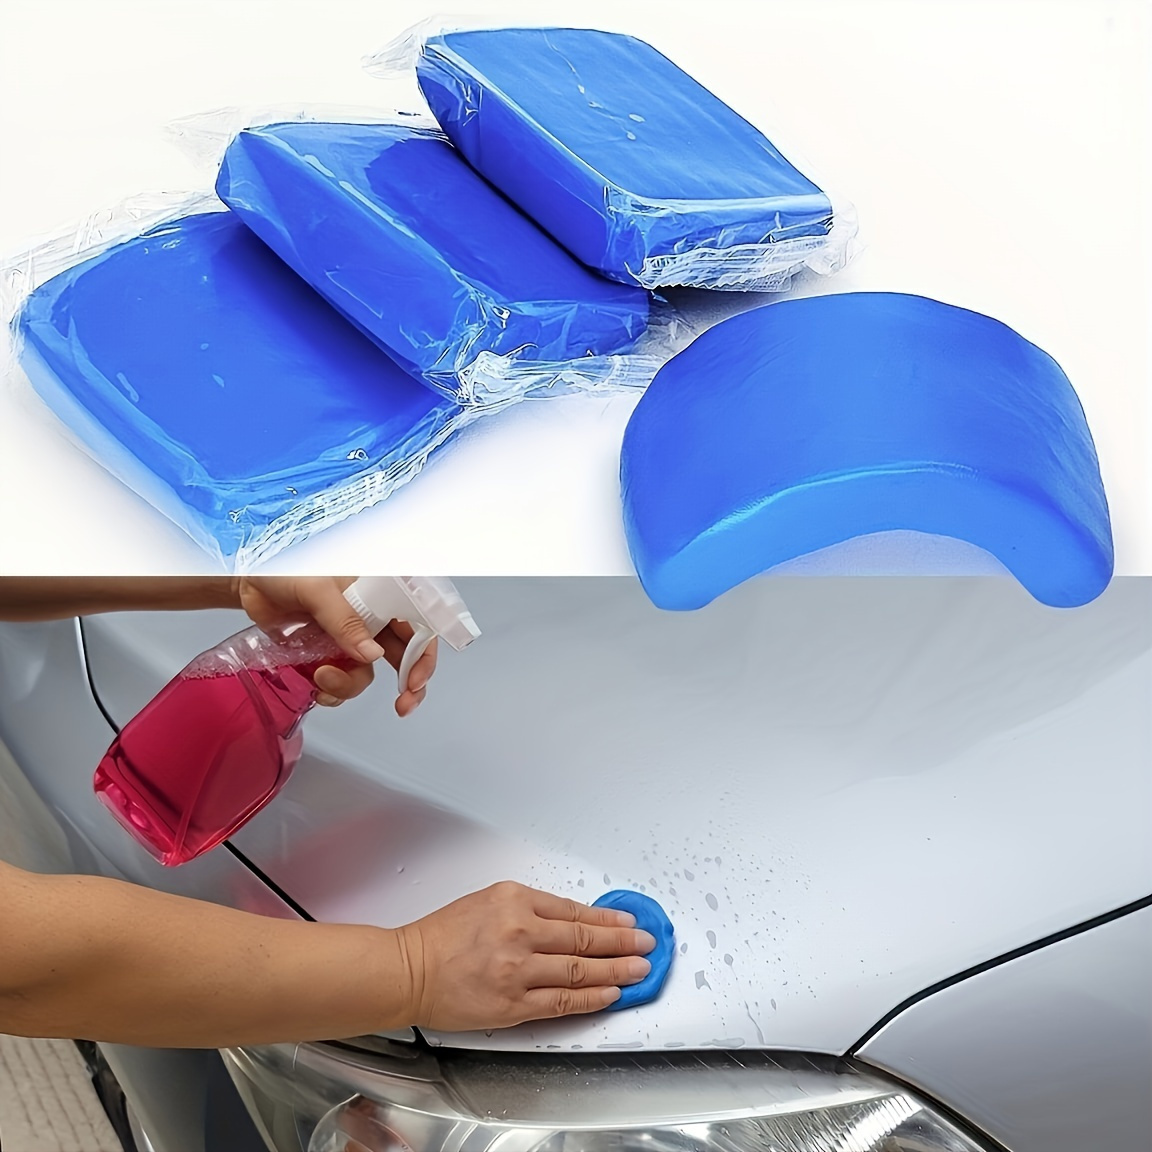 

Magic Jelly Clay Bar Squeegee For Windshield Cleaning - Auto Detailing Tool Removes Tough Grime, Perfect For Car Wash, 1pc 100g